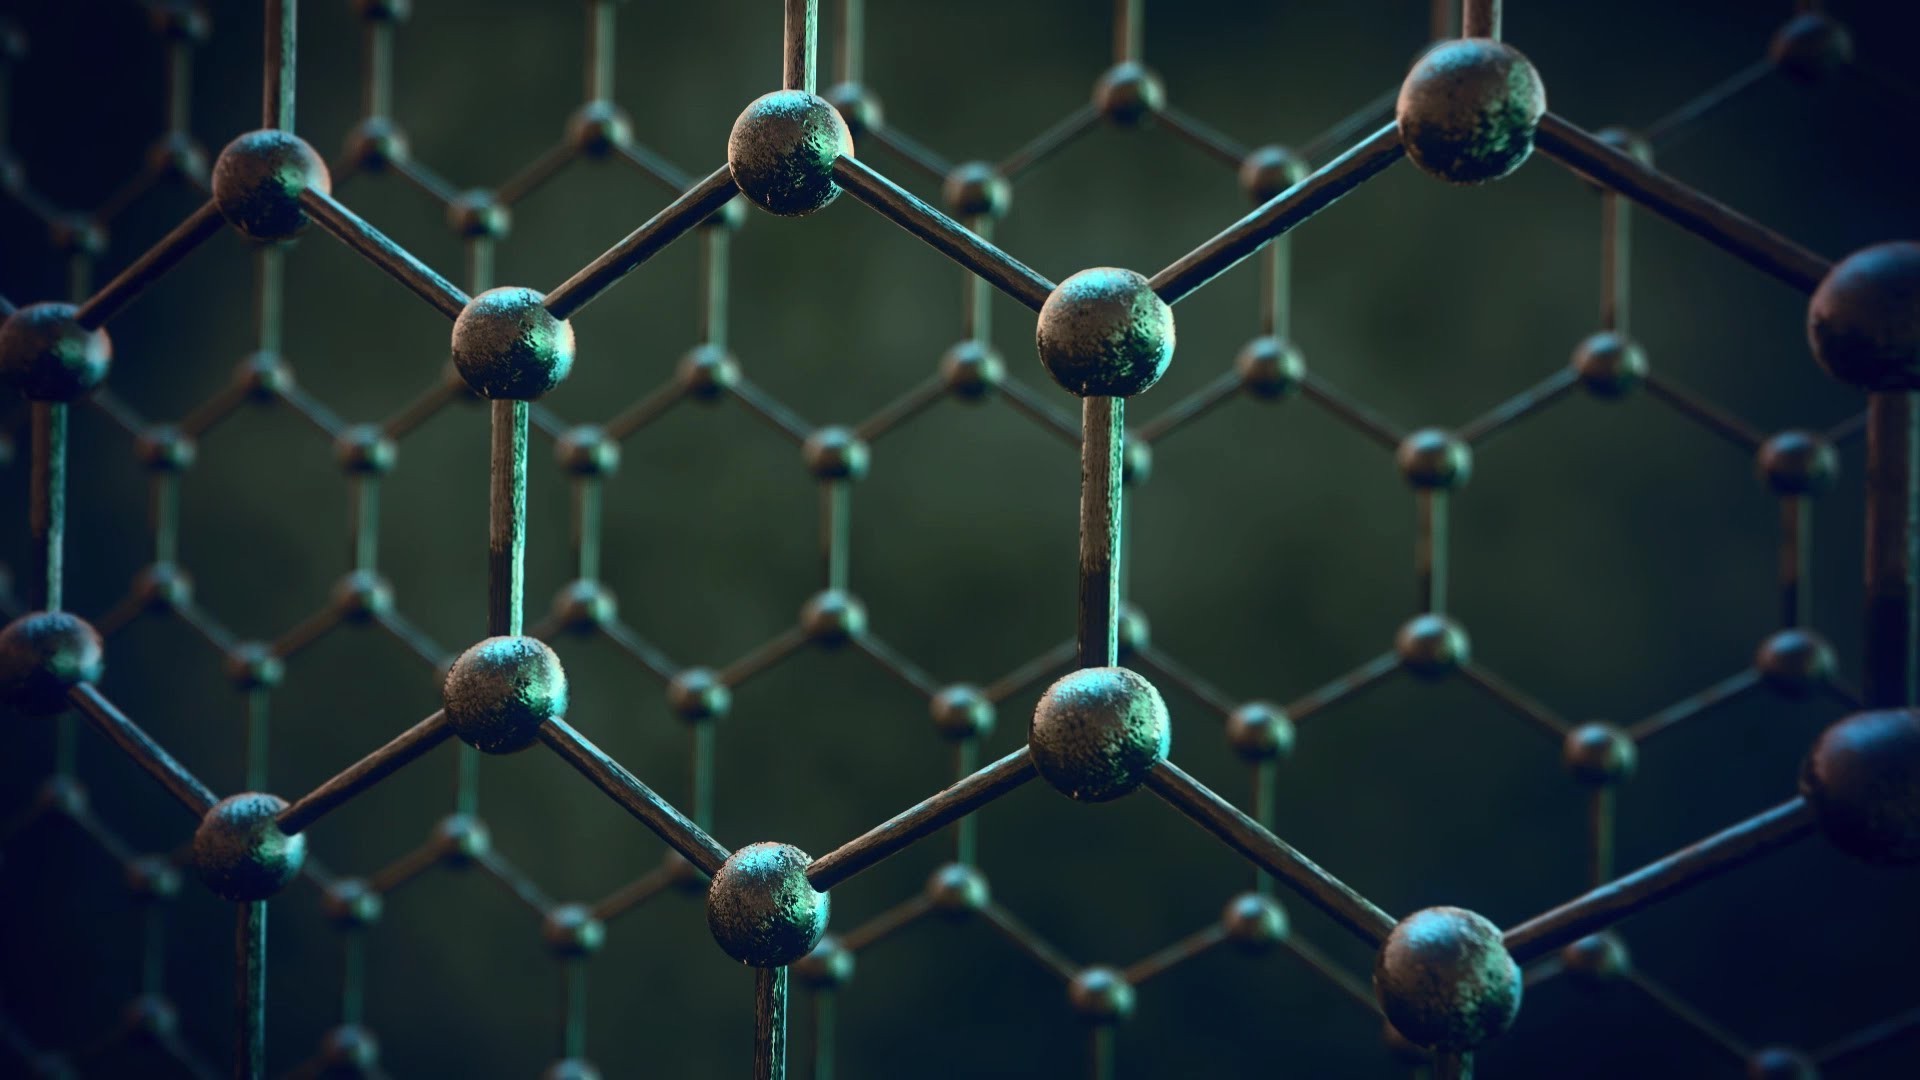 digital Art, Minimalism, Texture, Simple, Simple Background, Atoms, Hexagon, Ball, Depth Of Field, Blurred, Structure, Graphene, Chemical Structures Wallpaper